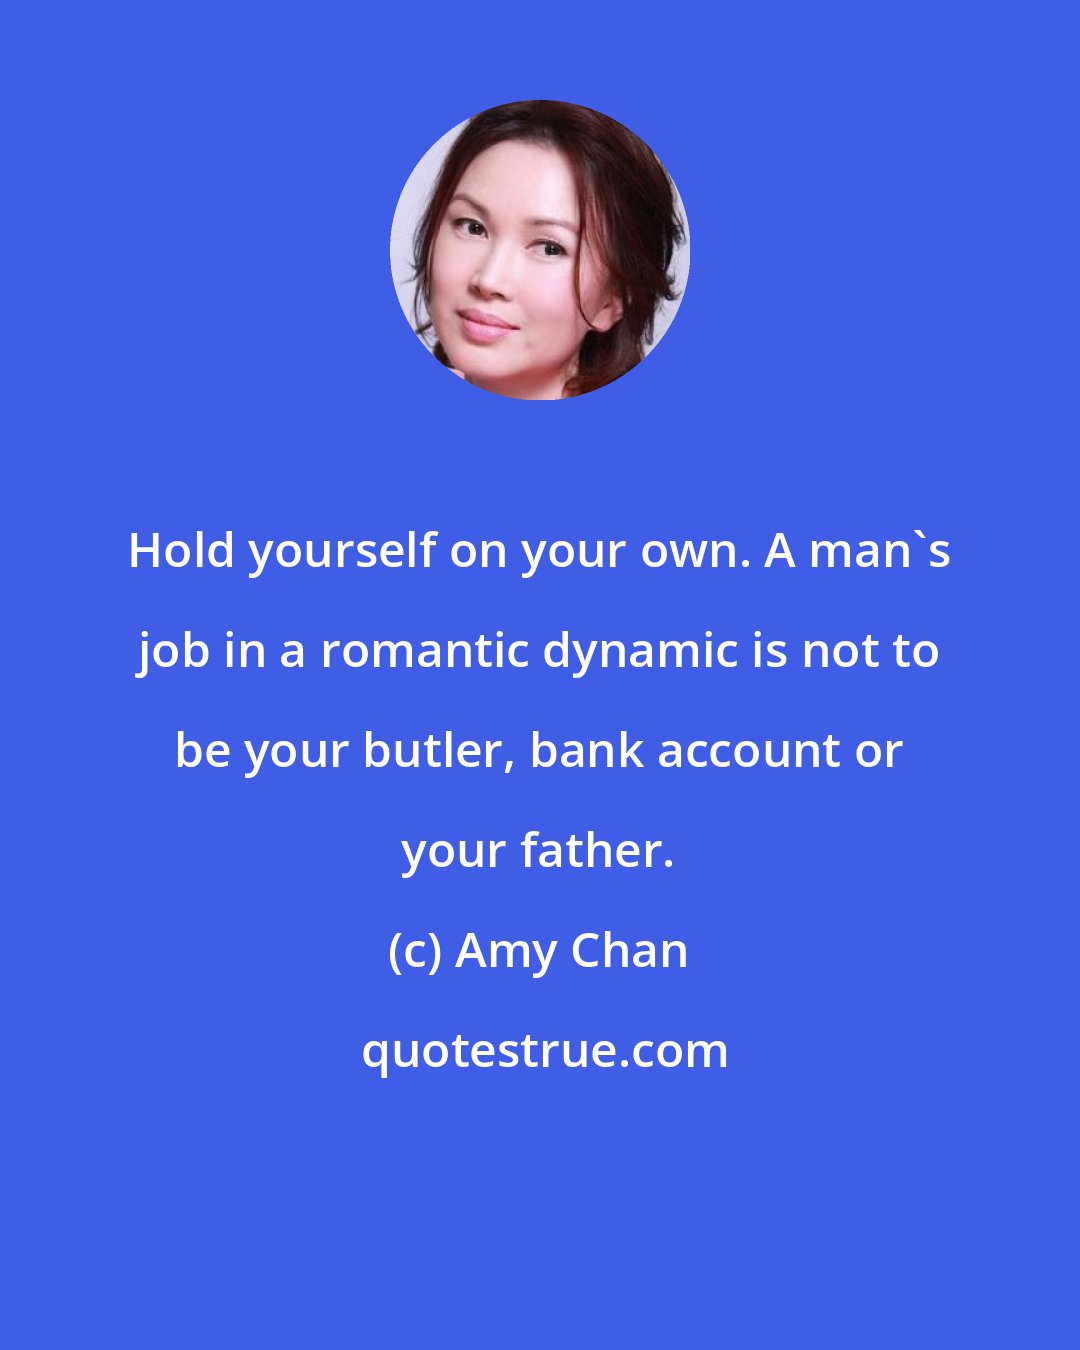 Amy Chan: Hold yourself on your own. A man's job in a romantic dynamic is not to be your butler, bank account or your father.